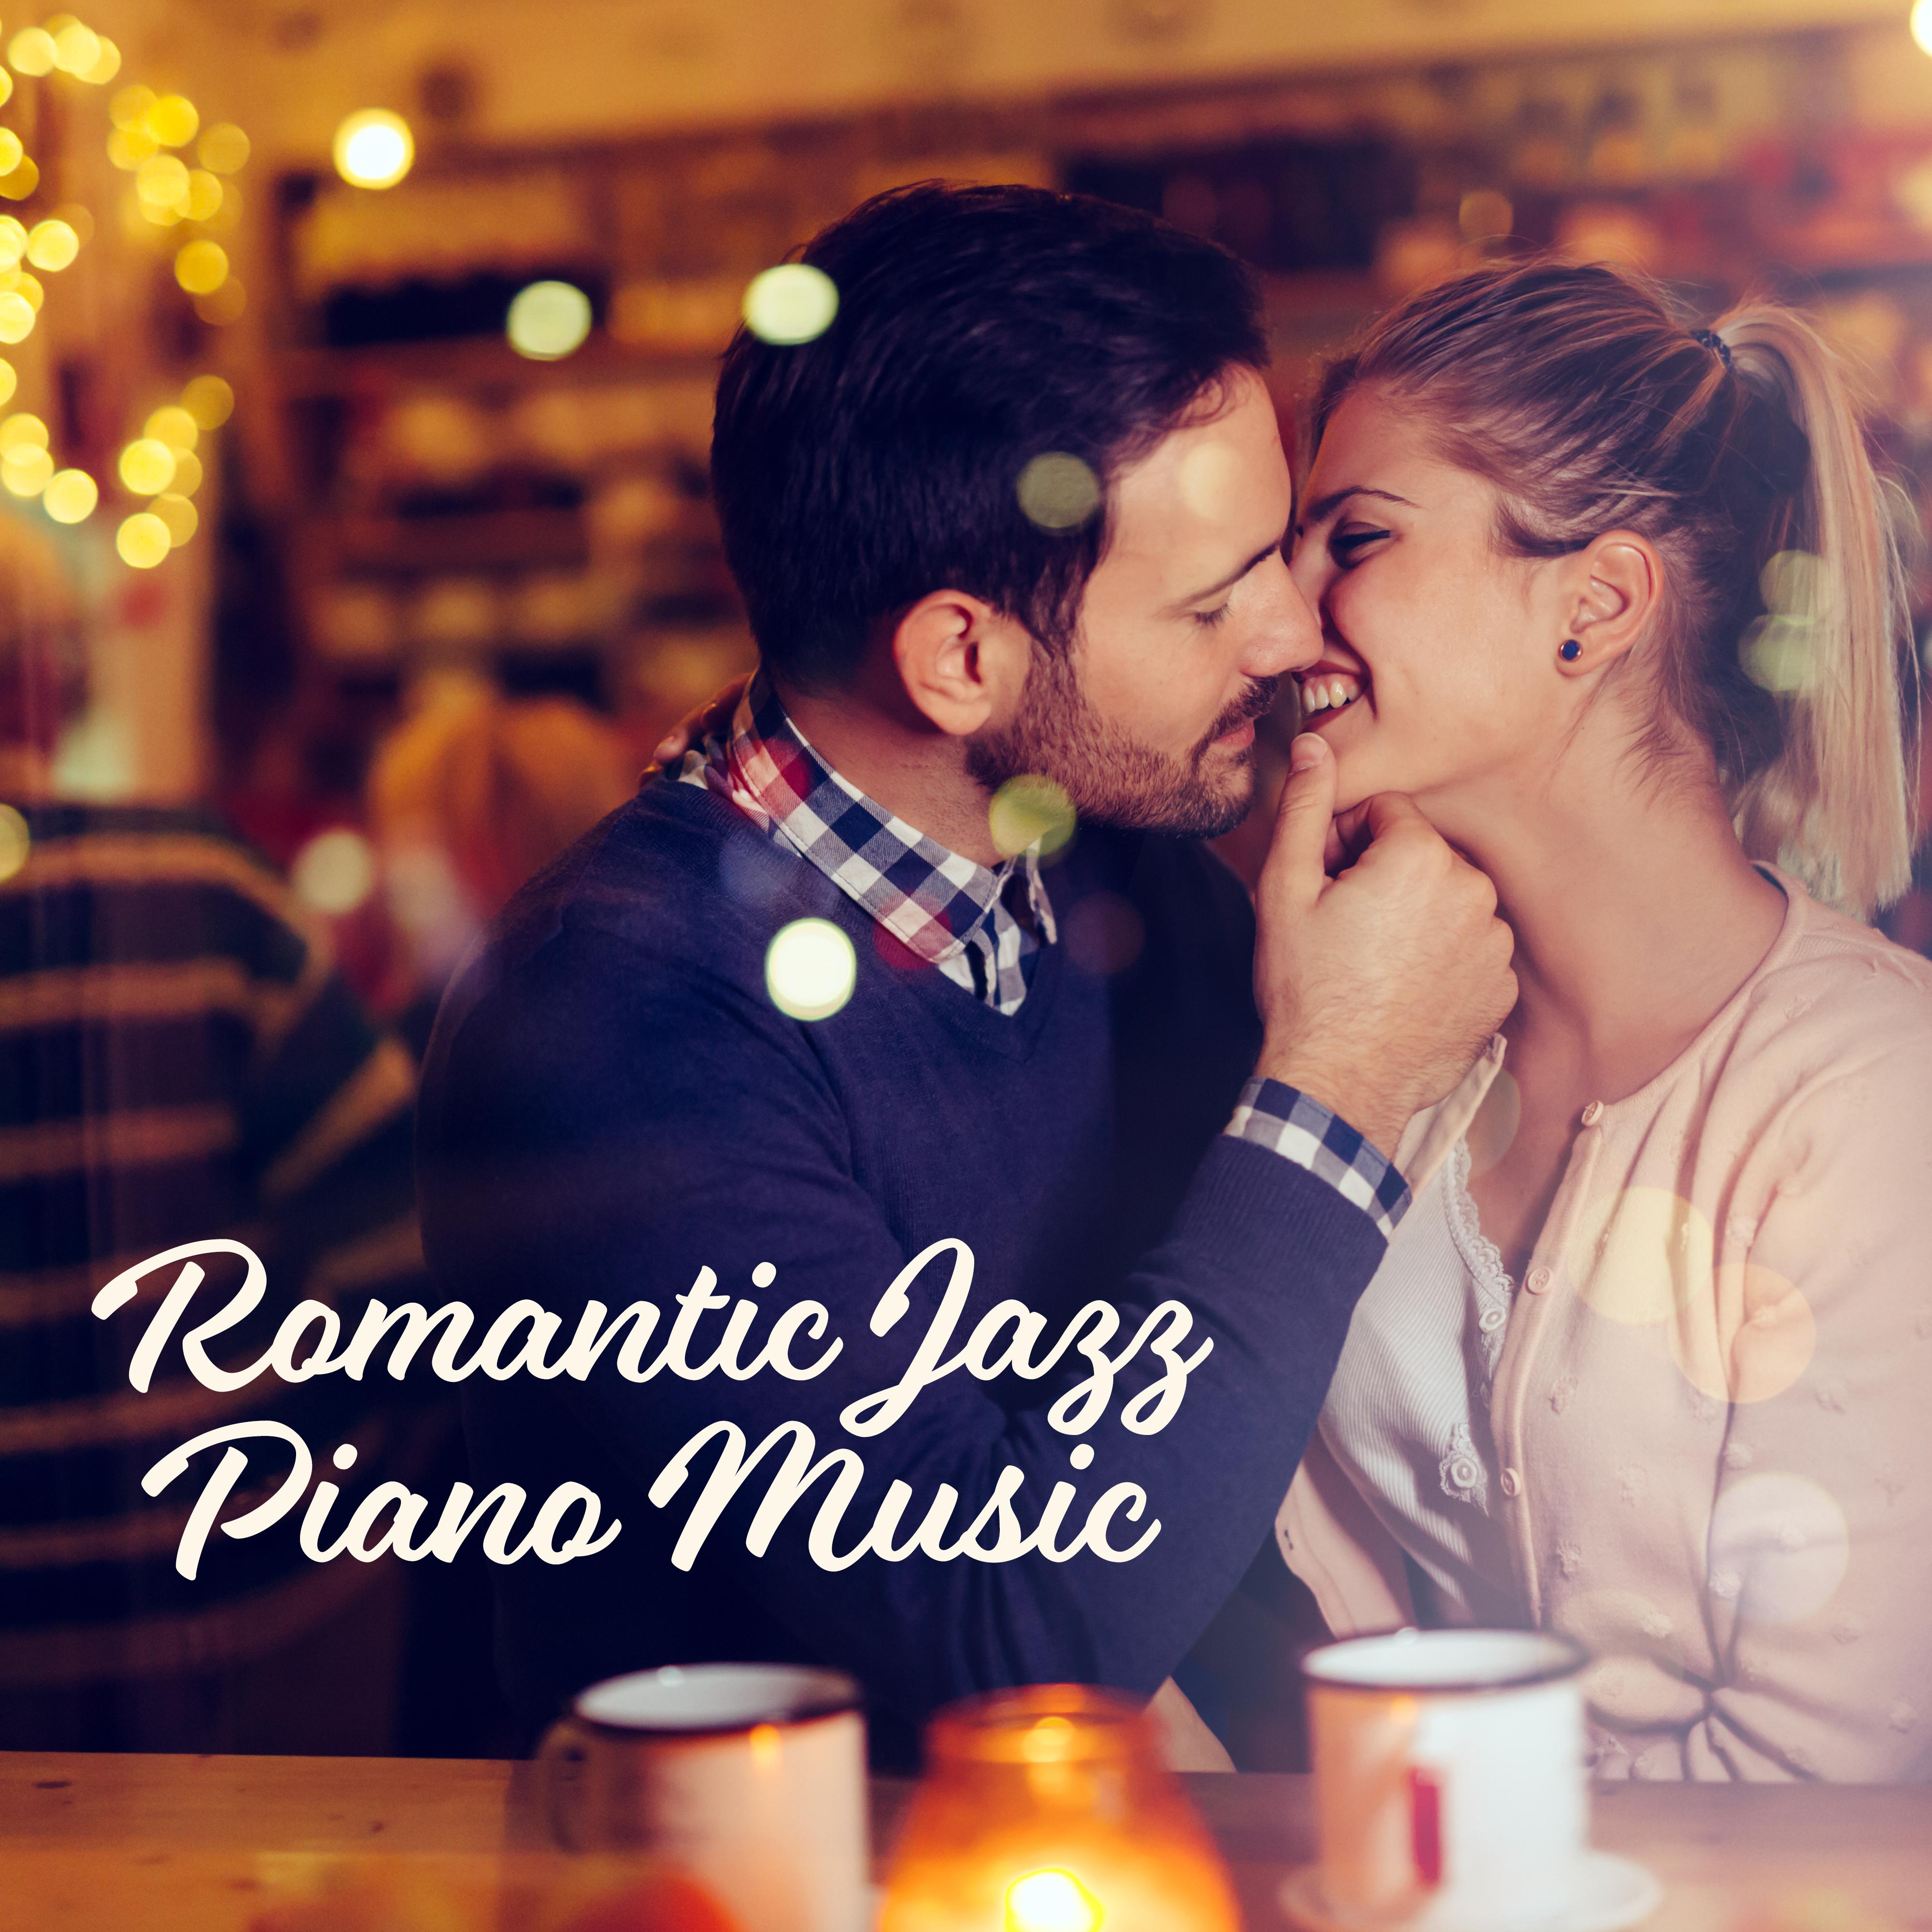 Romantic Jazz Piano Music - Sensual and Romantic Sounds, Firing Up the Ardent of Love and Desire, Perfect for a Date, Anniversary, Romantic Dinner or Erotic Elation